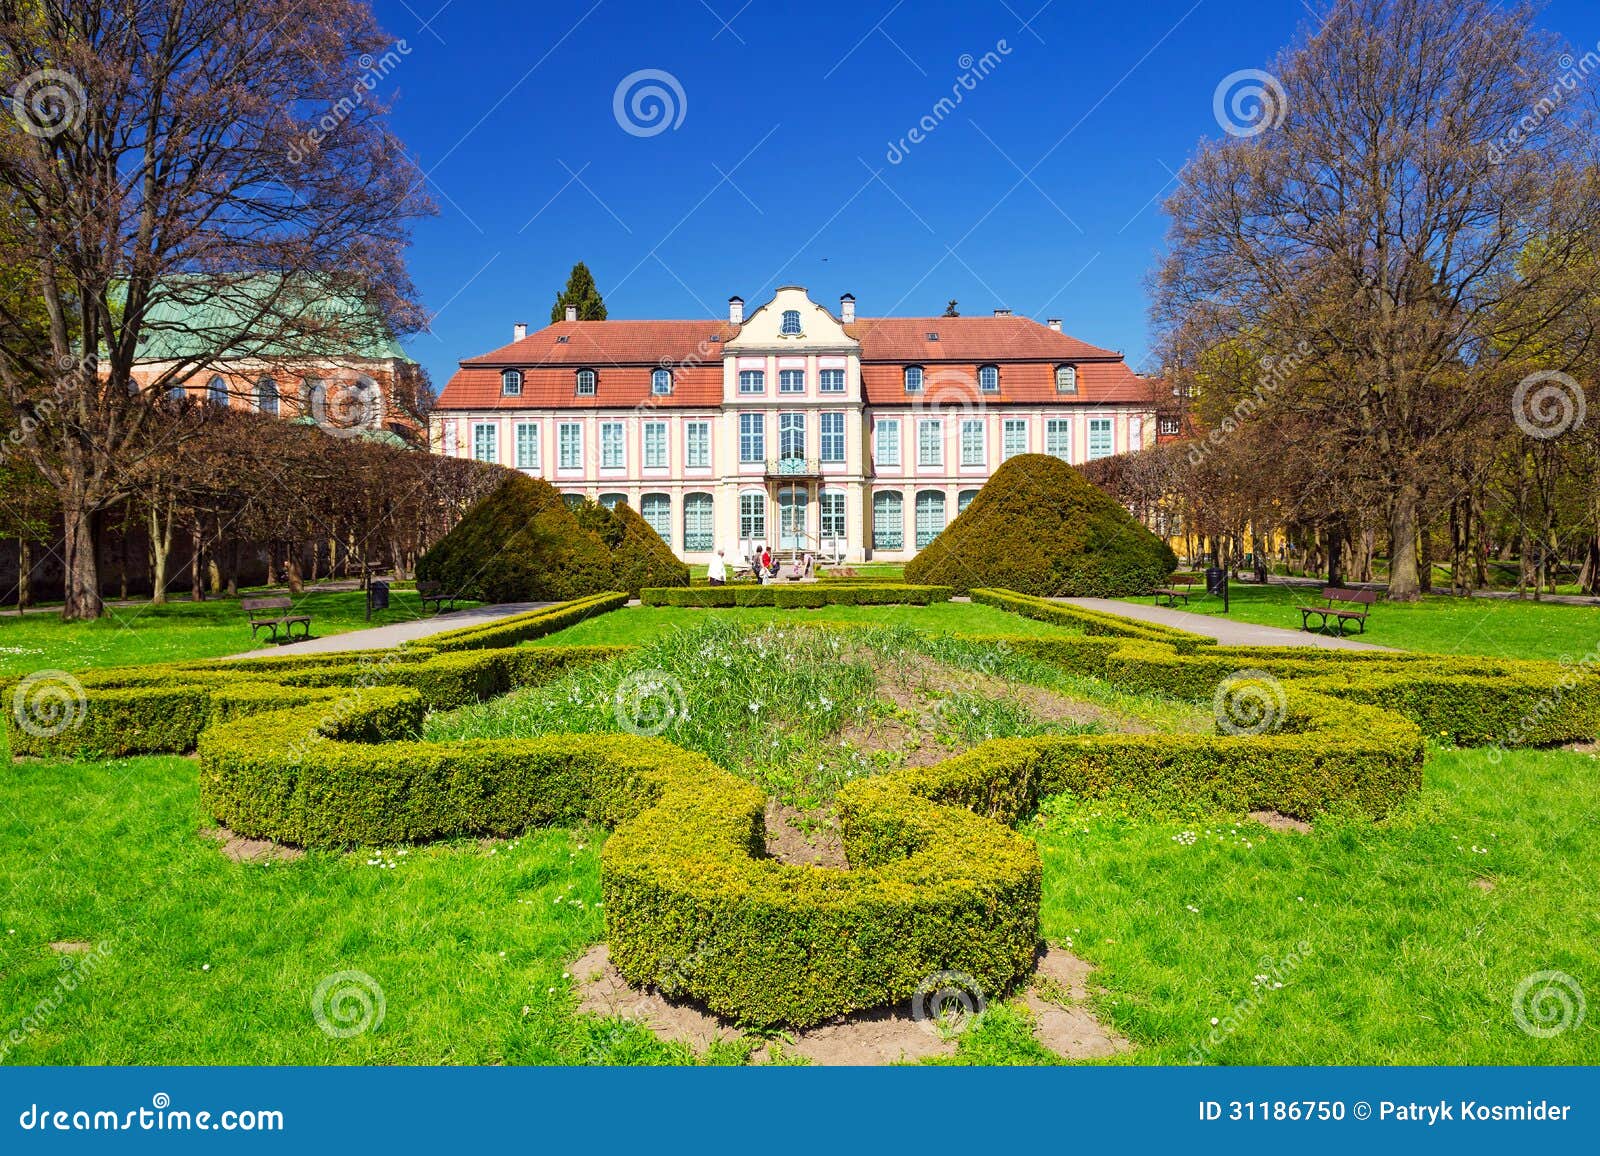 summer scenery of abbots palace in gdansk oliwa